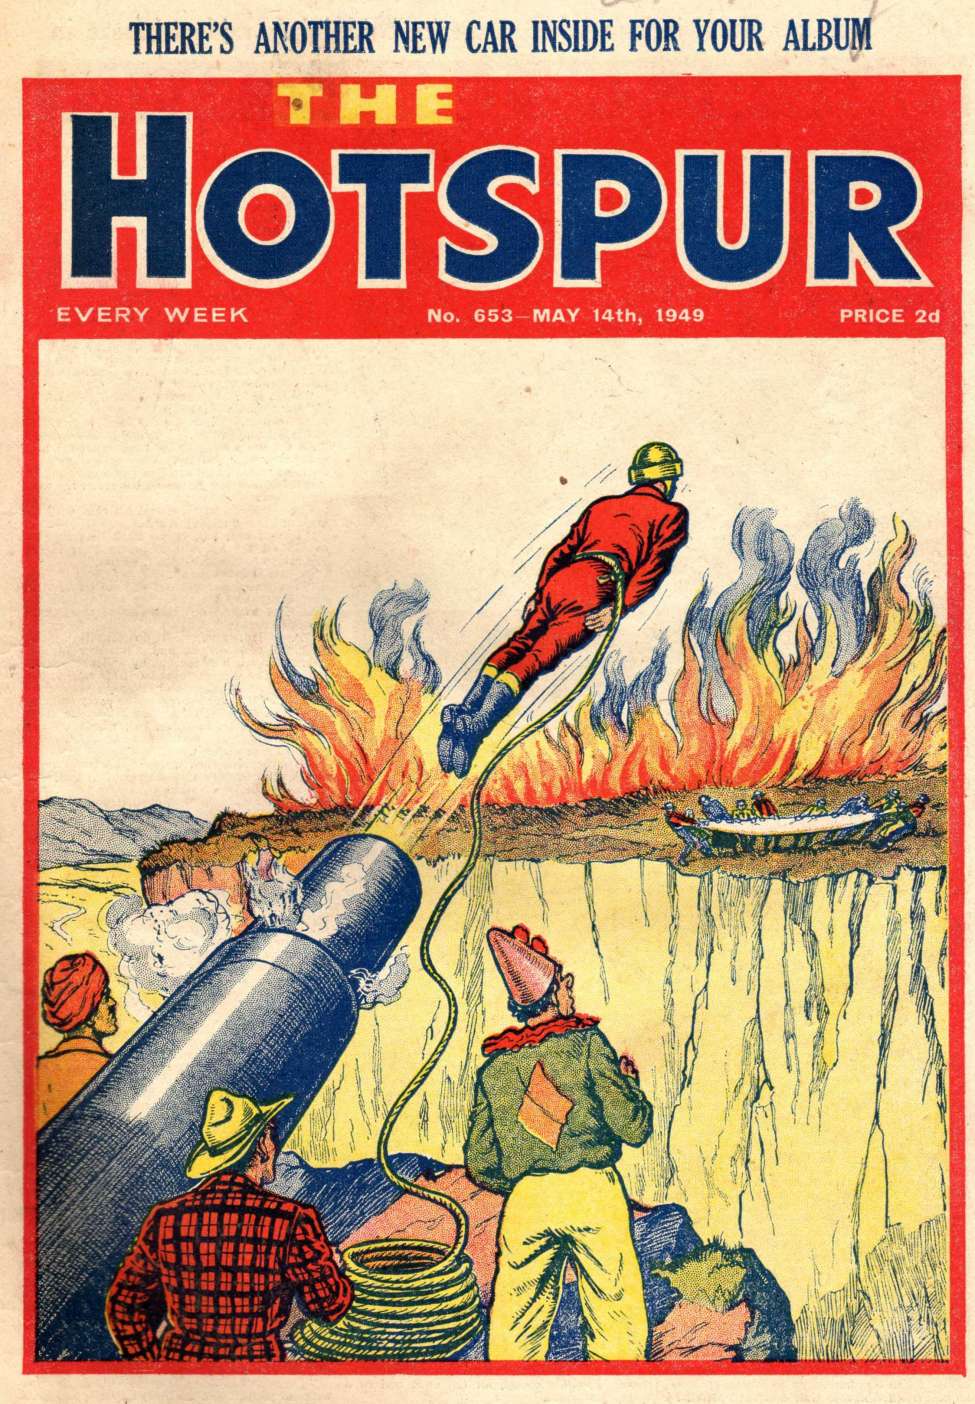 Book Cover For The Hotspur 653